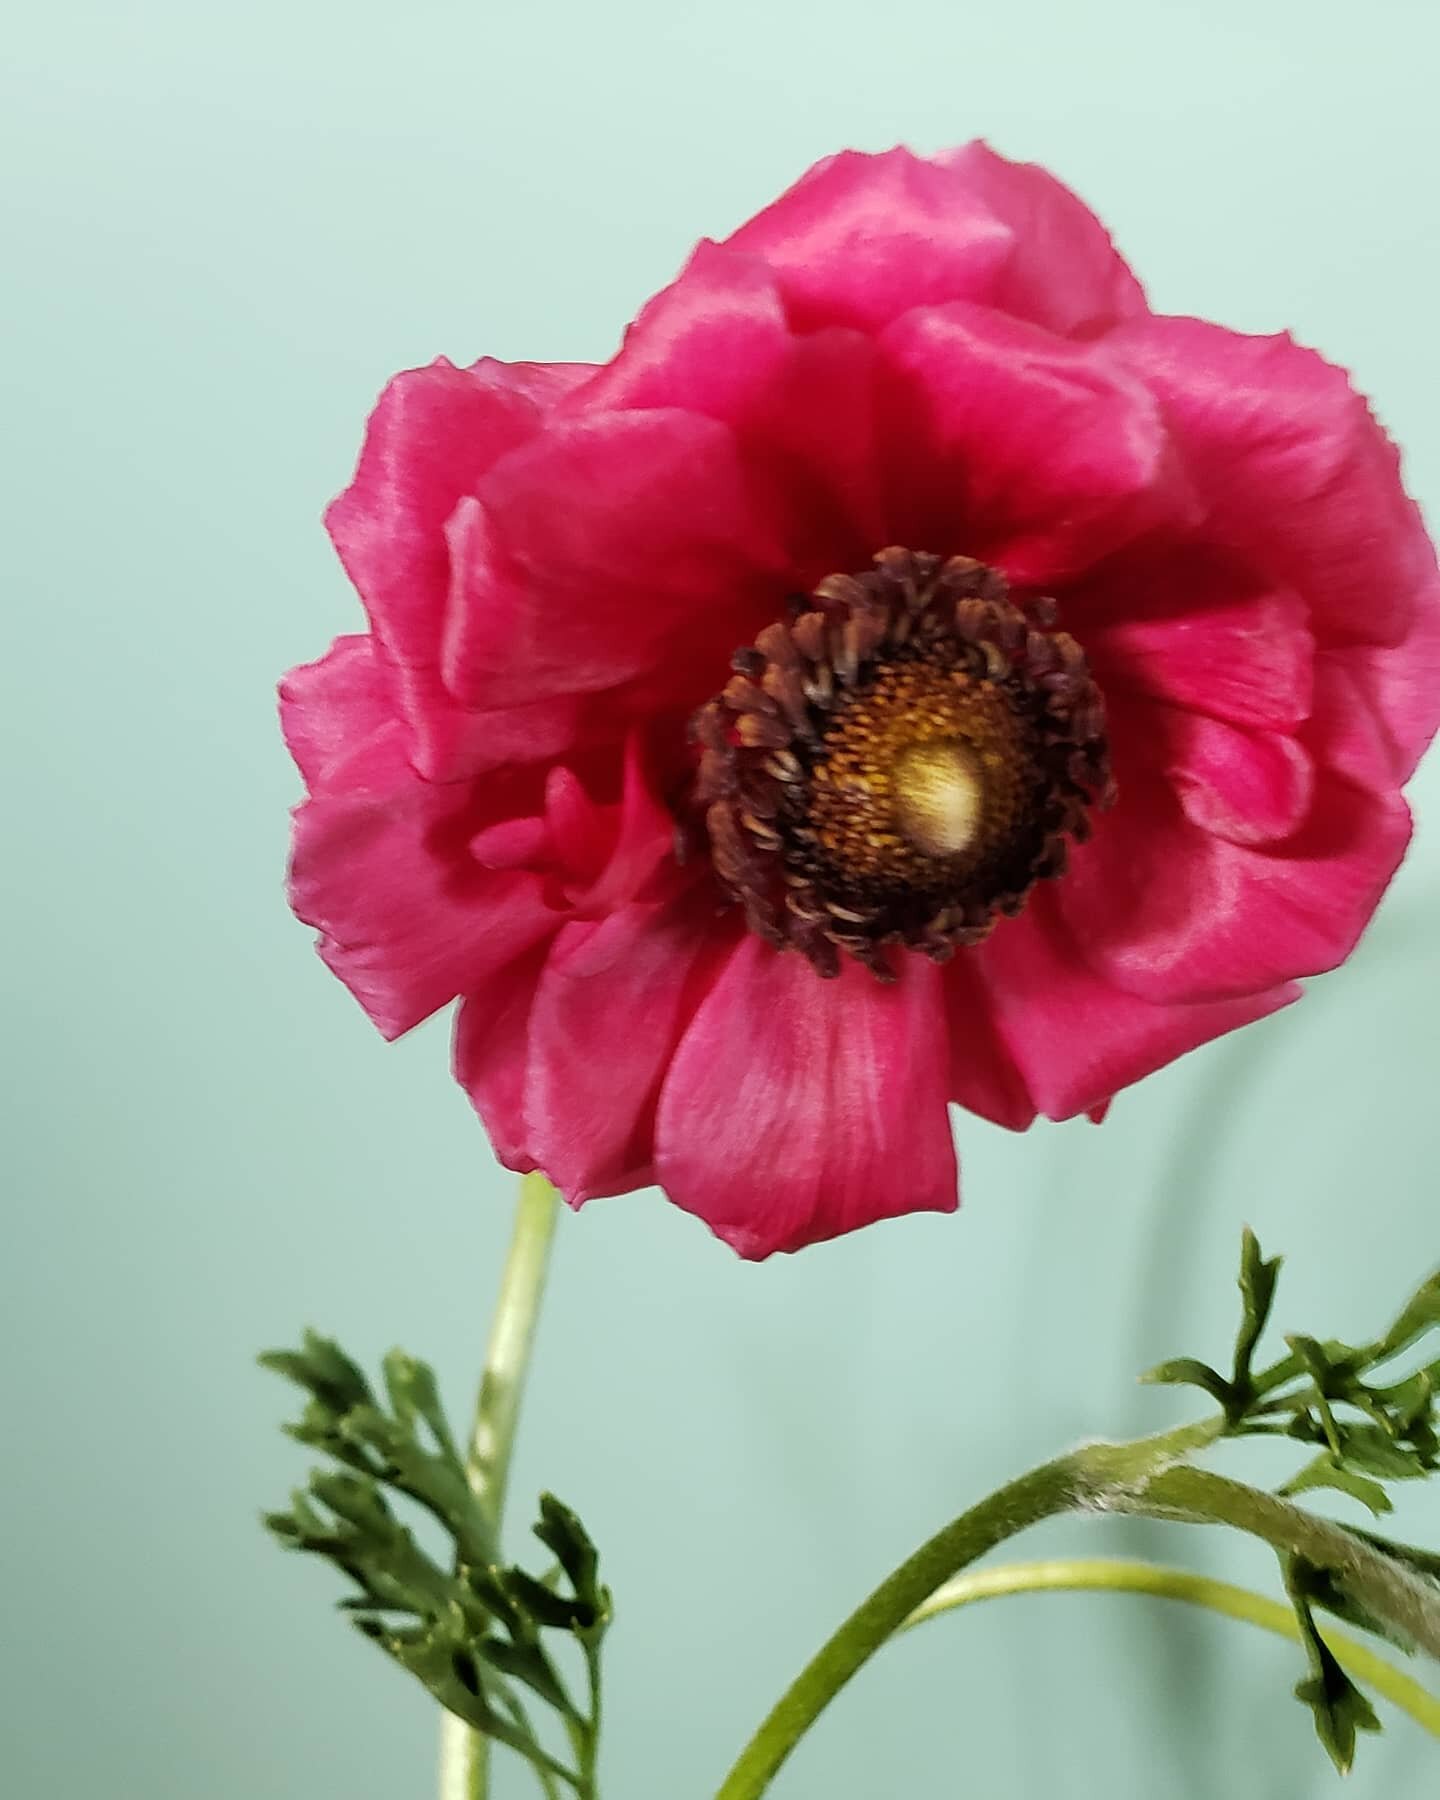 Today we take a gander at a blown open ranunculus or anemone against the kitchen cabinet.  My brain isn't working, so apologies for my lack of flower knowledge.  I'm sure it'll come to me in two hours when I least expect it.